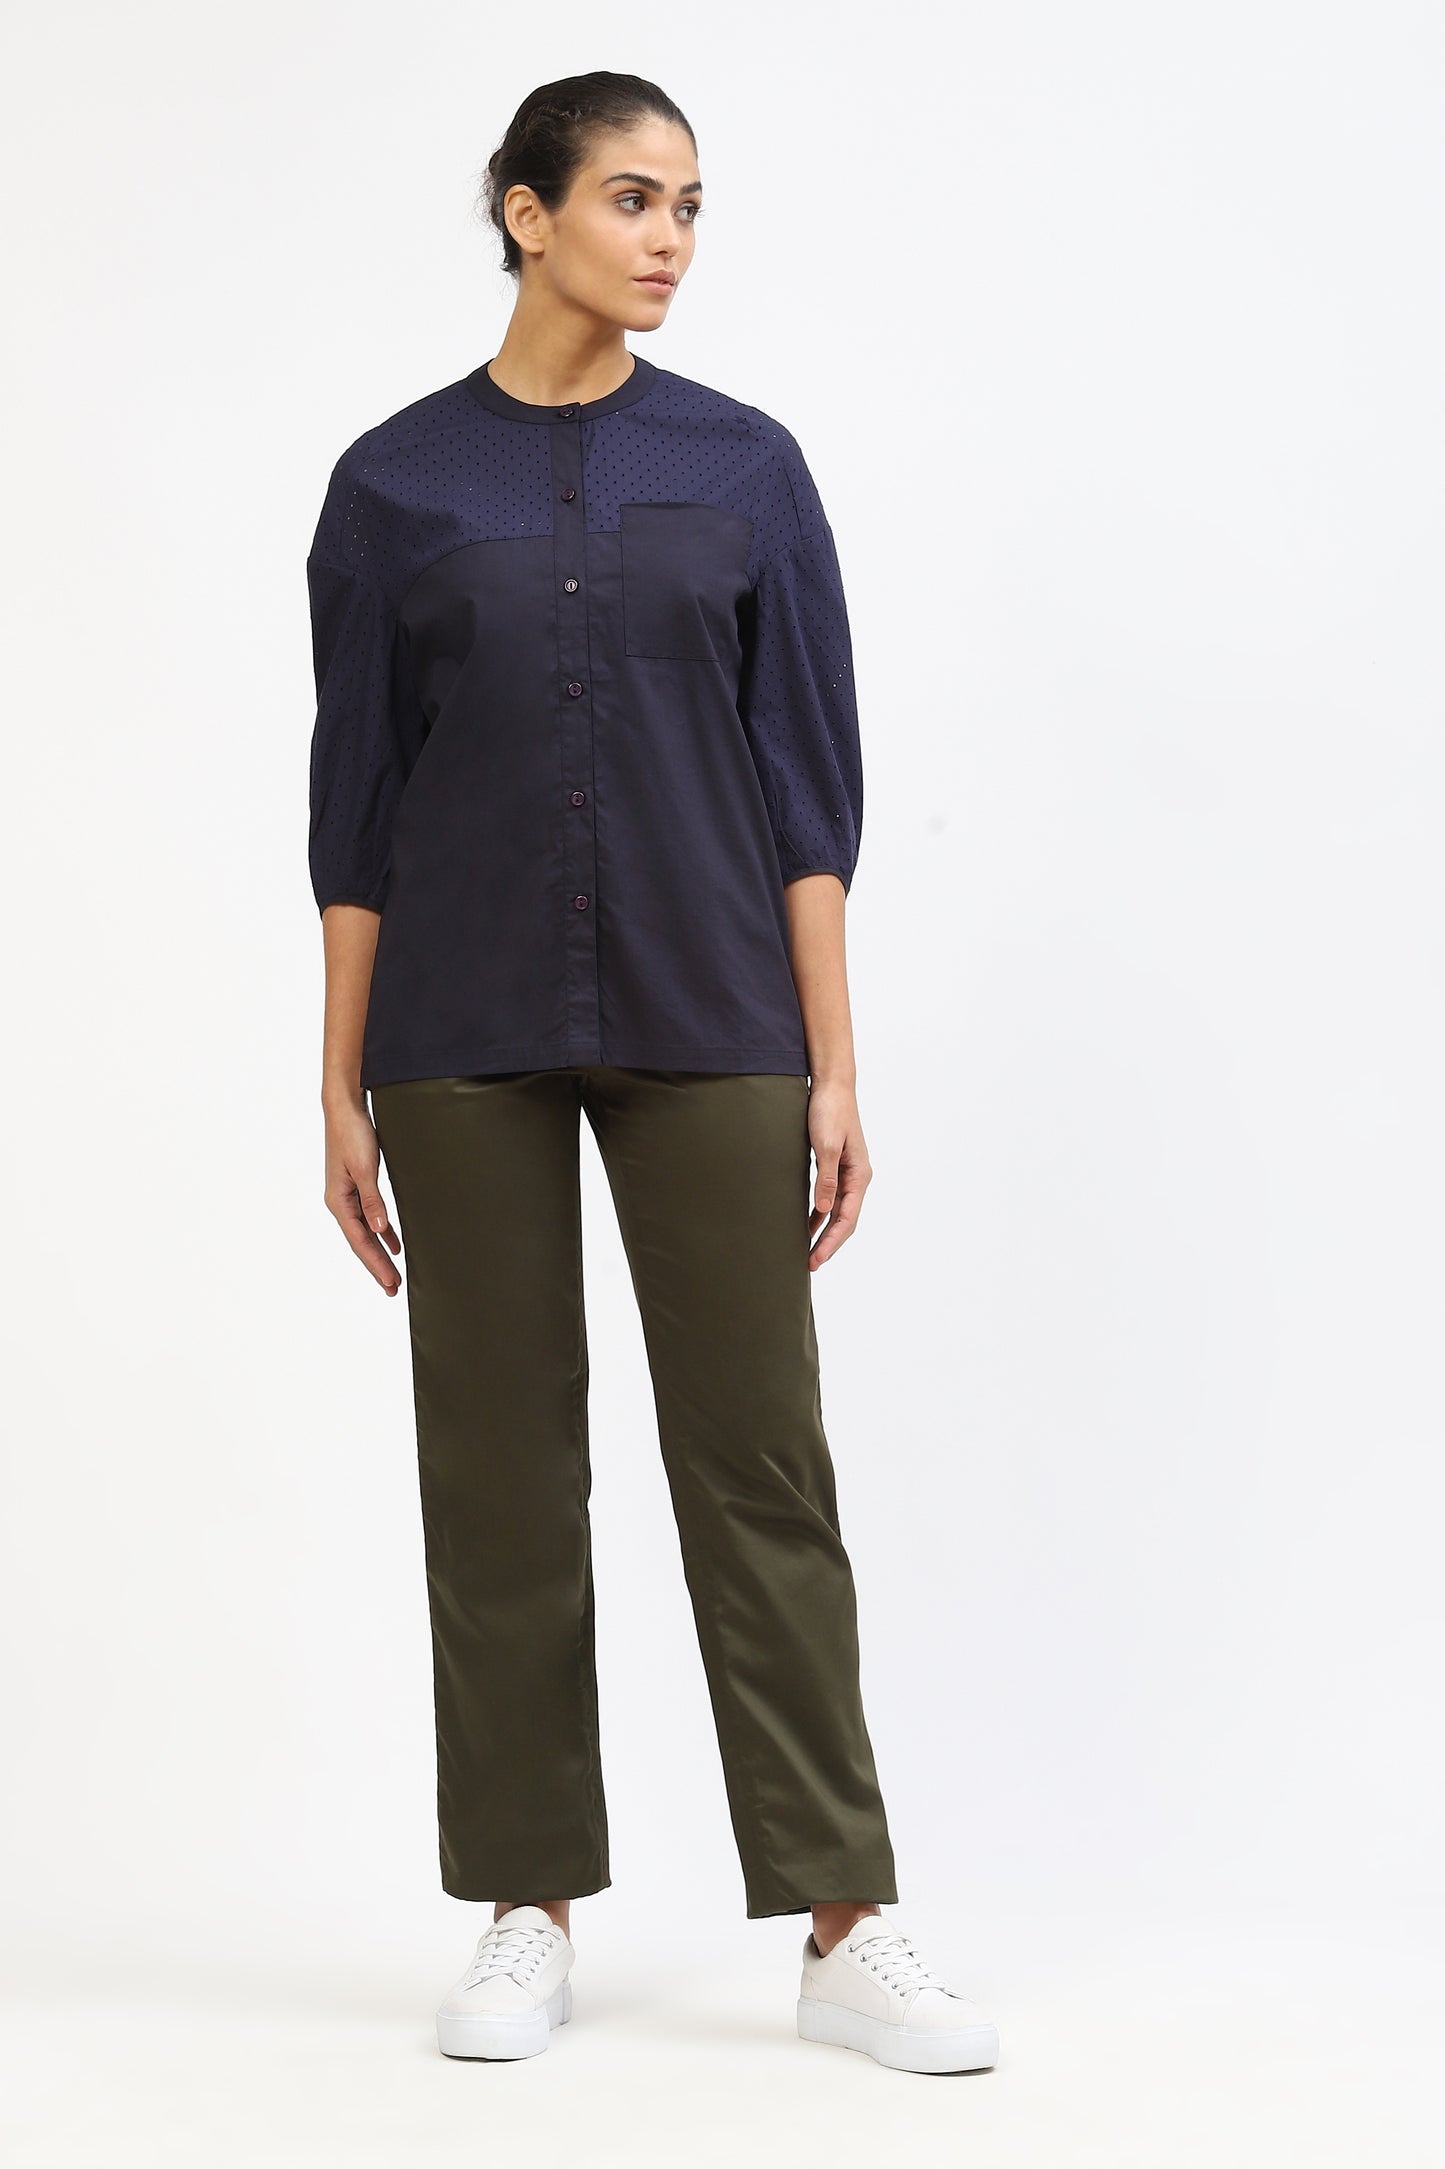 Navy Blue Cotton Shirt For Women With Perforated Texture Detail